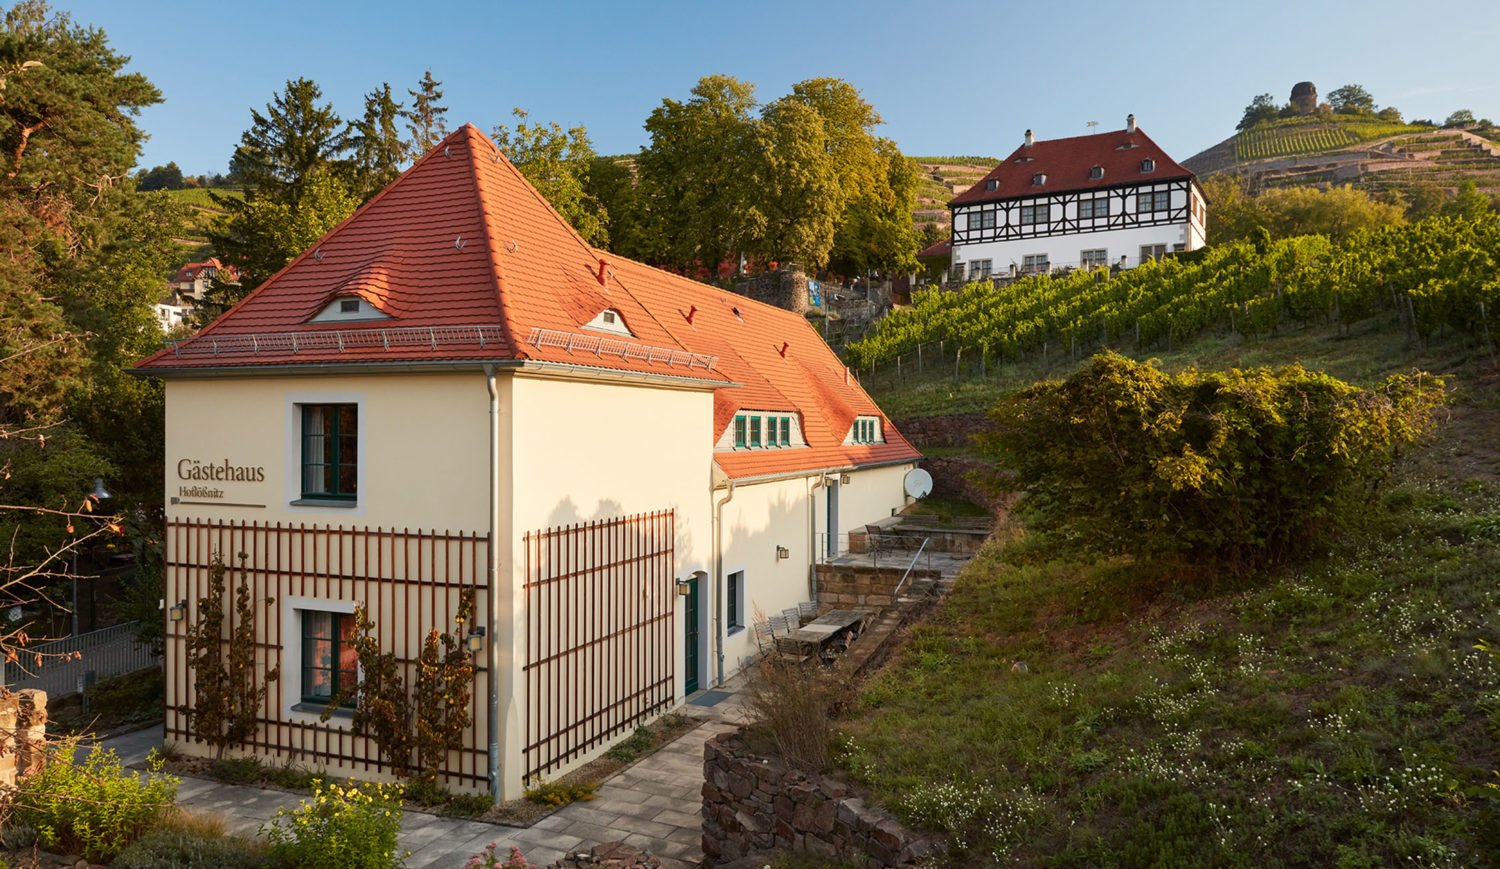 Upscale country house style in the middle of the vineyards - the guest house of Hoflößnitz